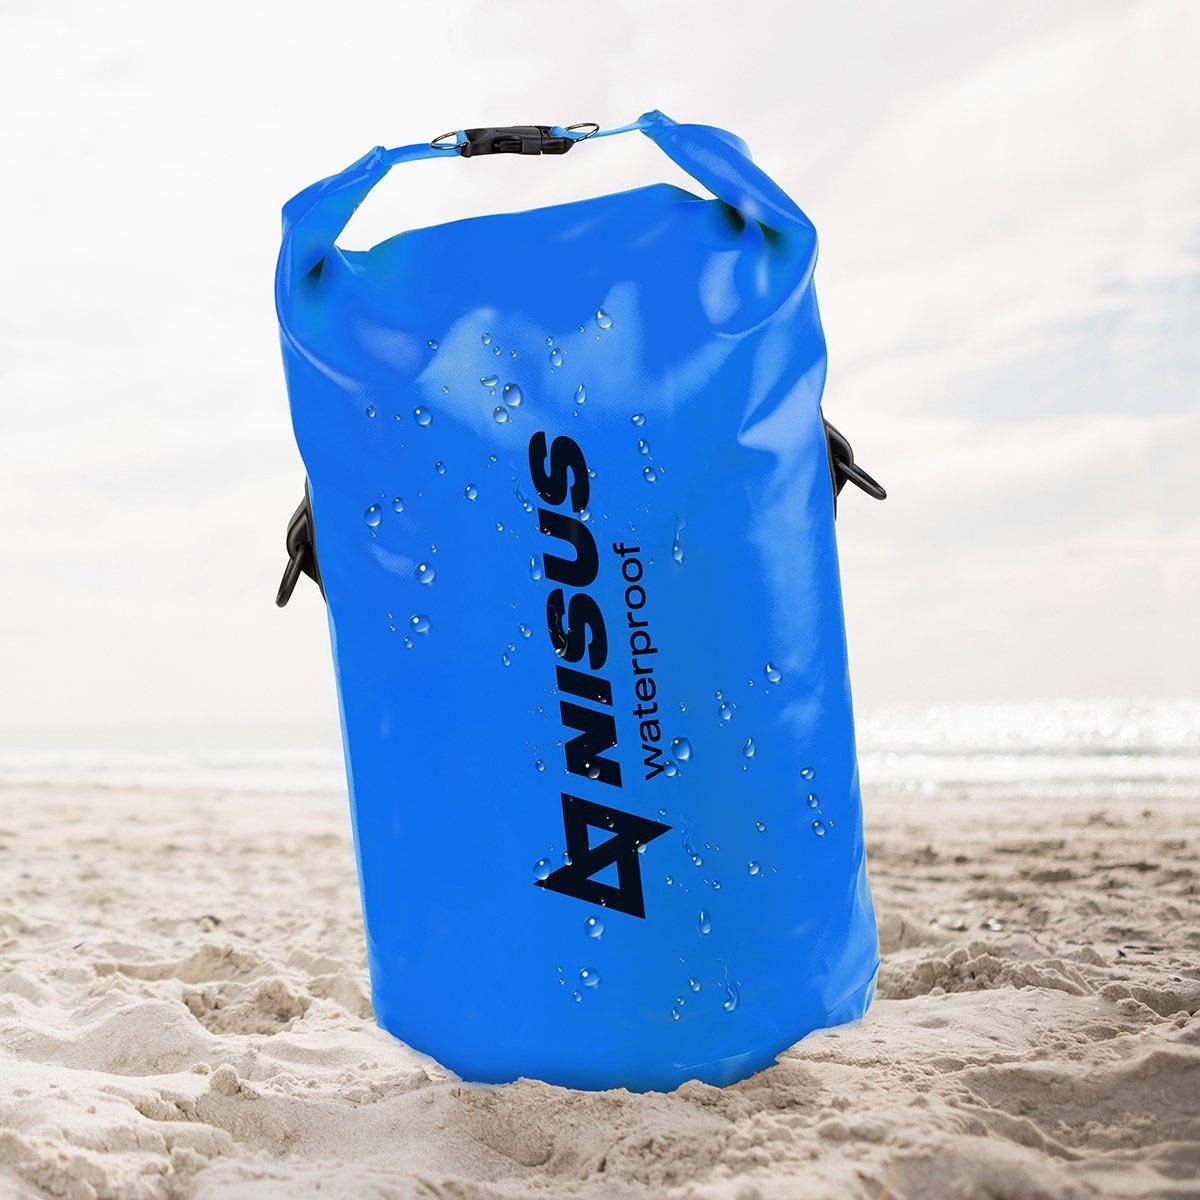 30 L Blue Waterproof Compact Dry Bag standing on the sand